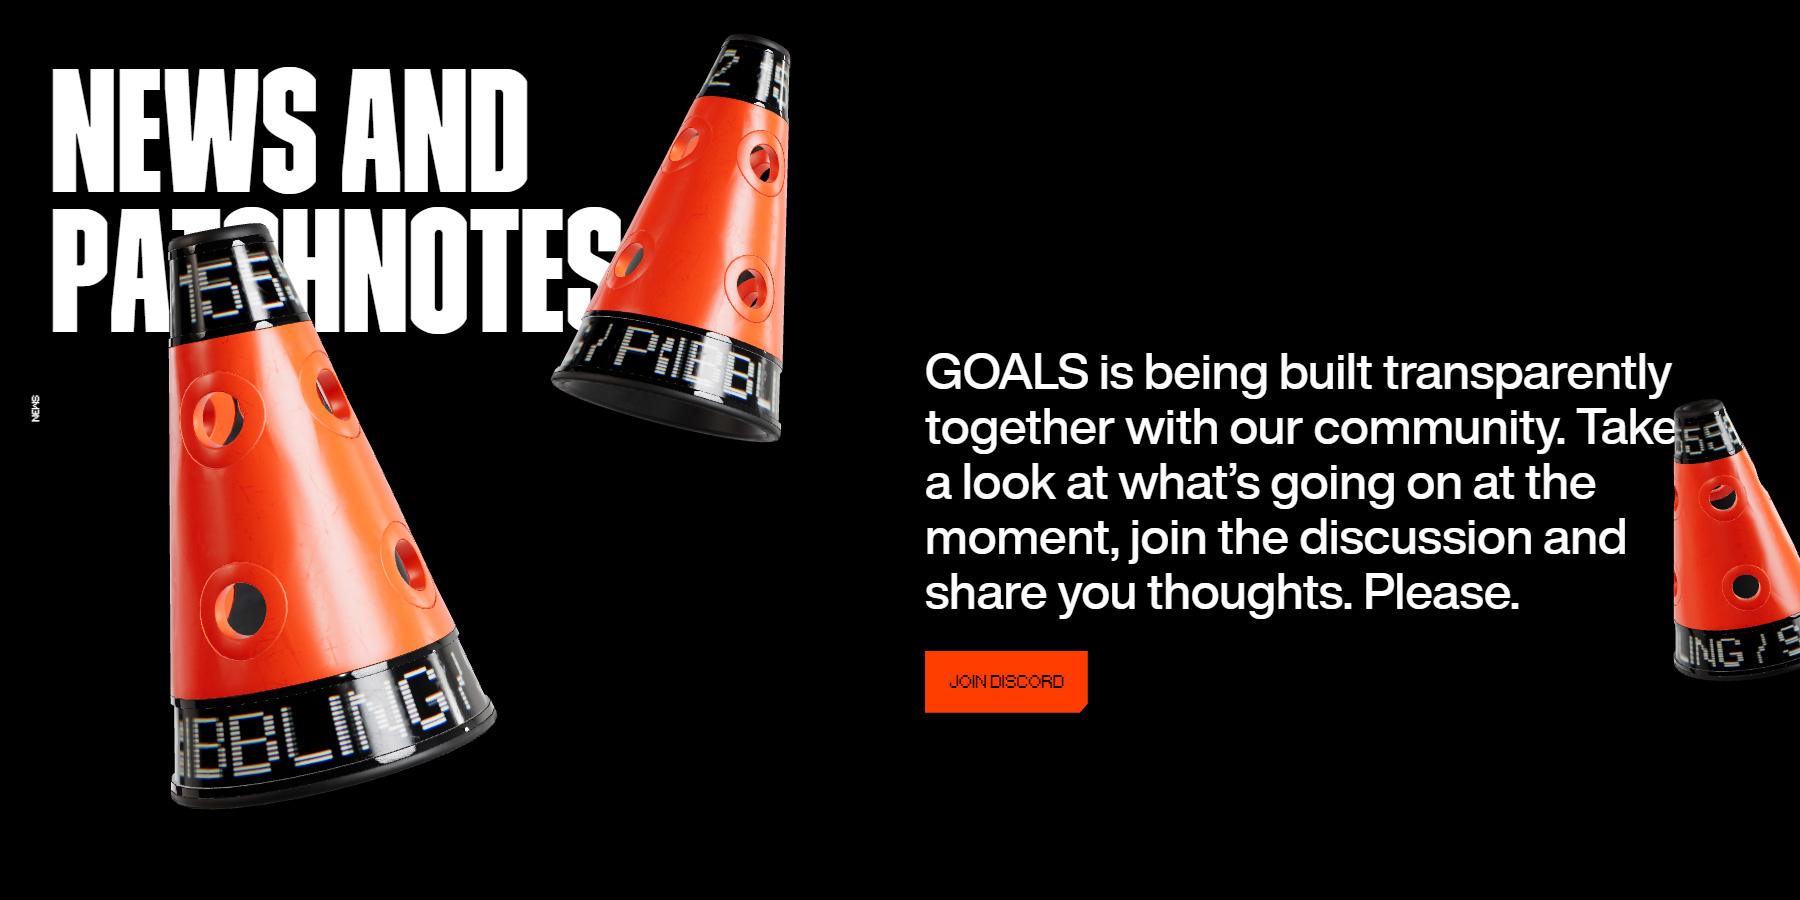 Goals - Website of the Day